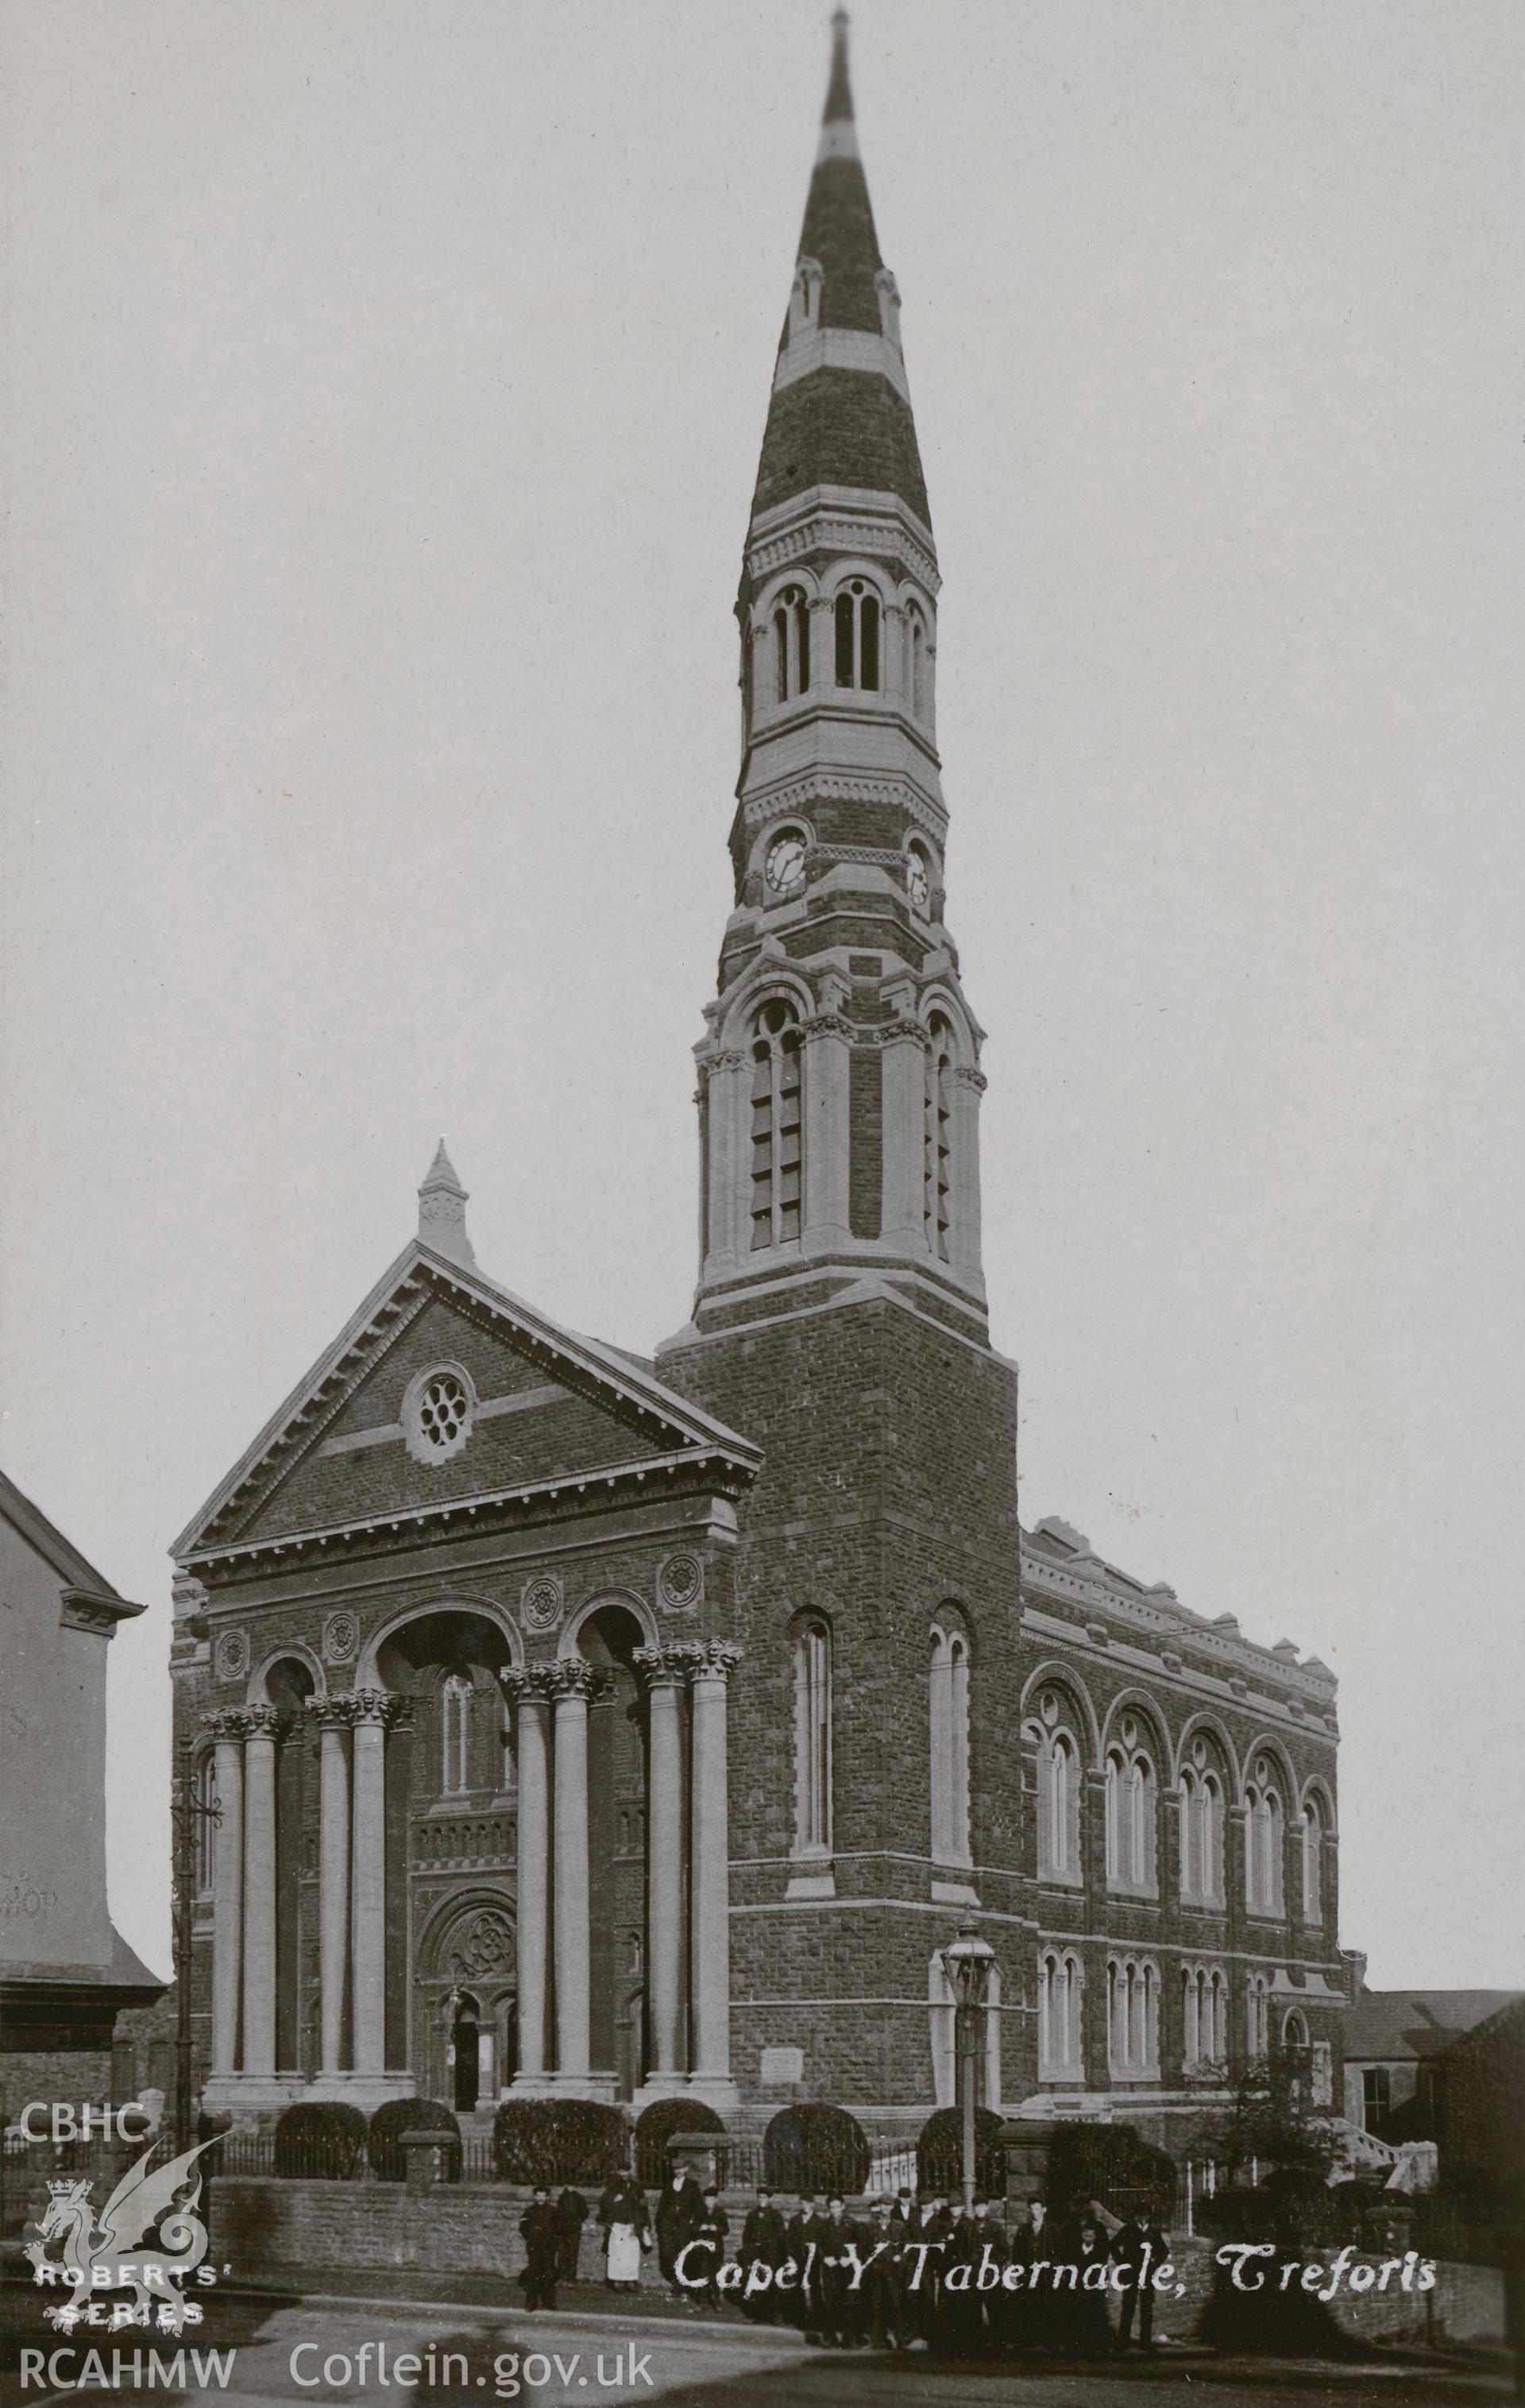 Digital copy of monochrome postcard showing exterior view of Tabernacle Welsh Independent chapel, Woodfield Street, Treforys. Postcard is part of the Roberts' Series. Loaned for copying by Thomas Lloyd.